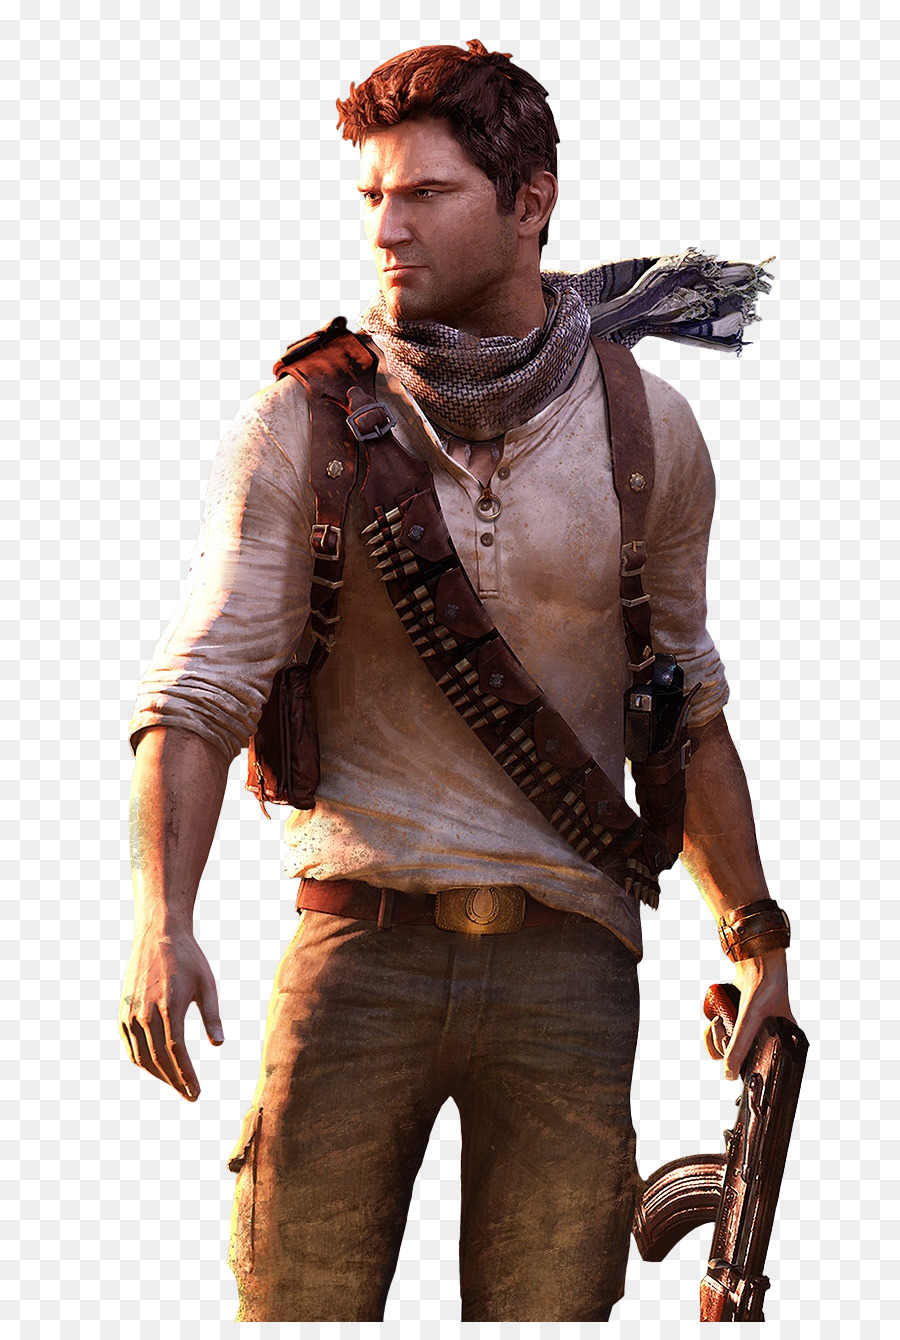 Uncharted PNG - 171209